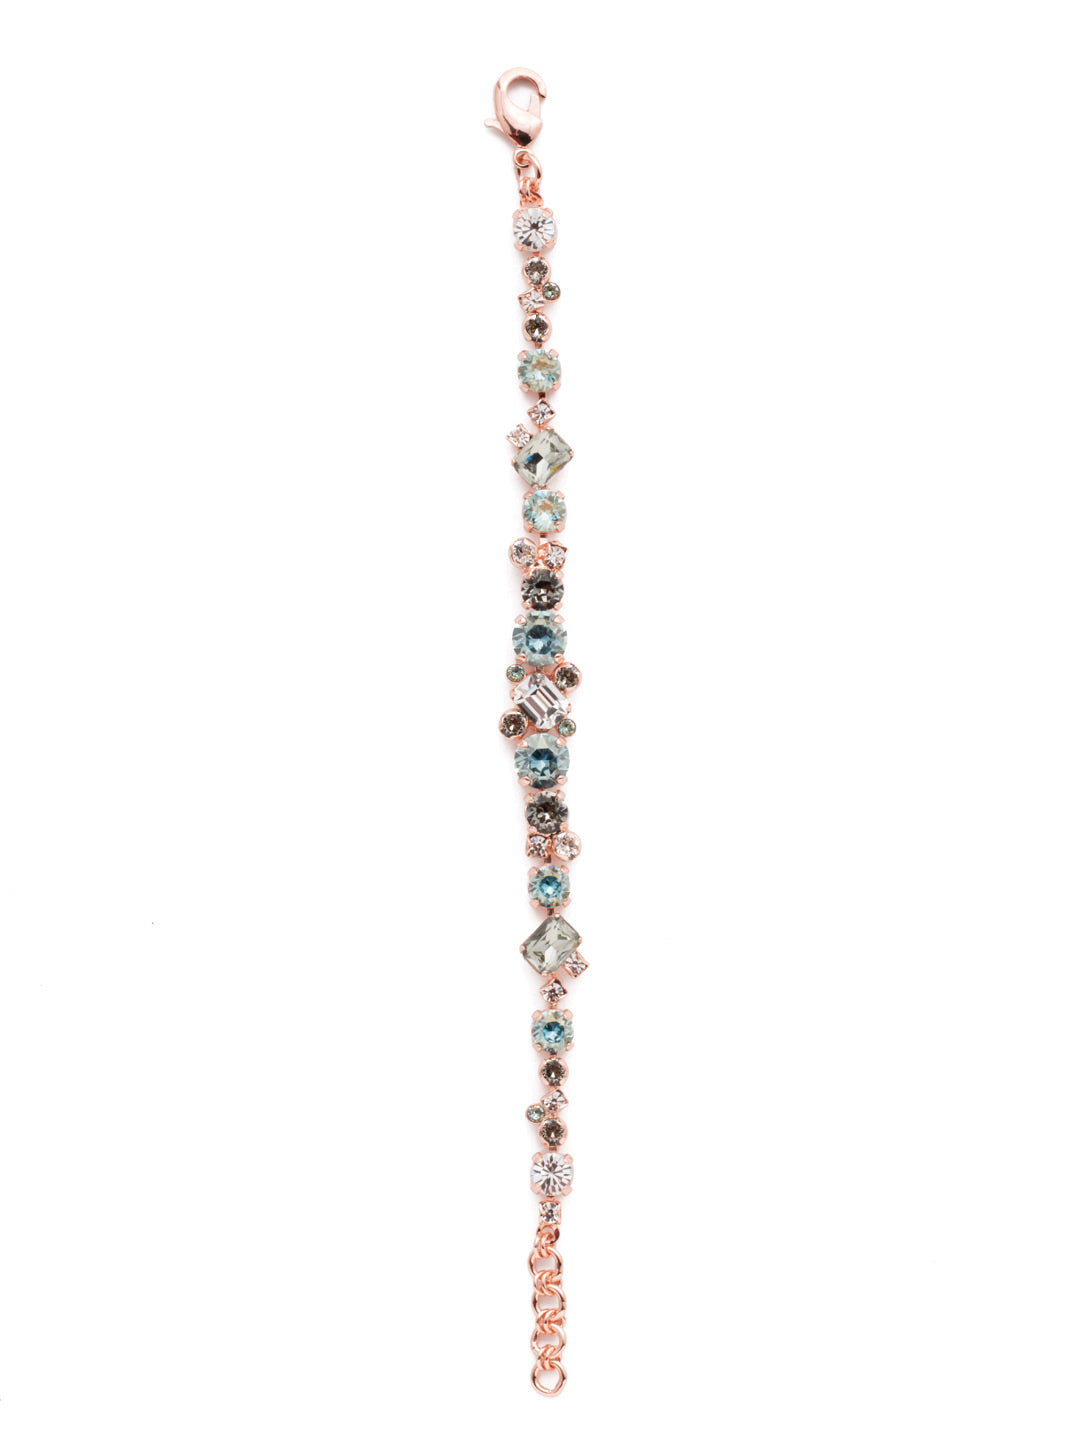 Geo Classic Tennis Bracelet - BDG46RGCAZ - Delicate round crystals mix with emerald cut crystals for a classic and elegant look. From Sorrelli's Crystal Azure collection in our Rose Gold-tone finish.